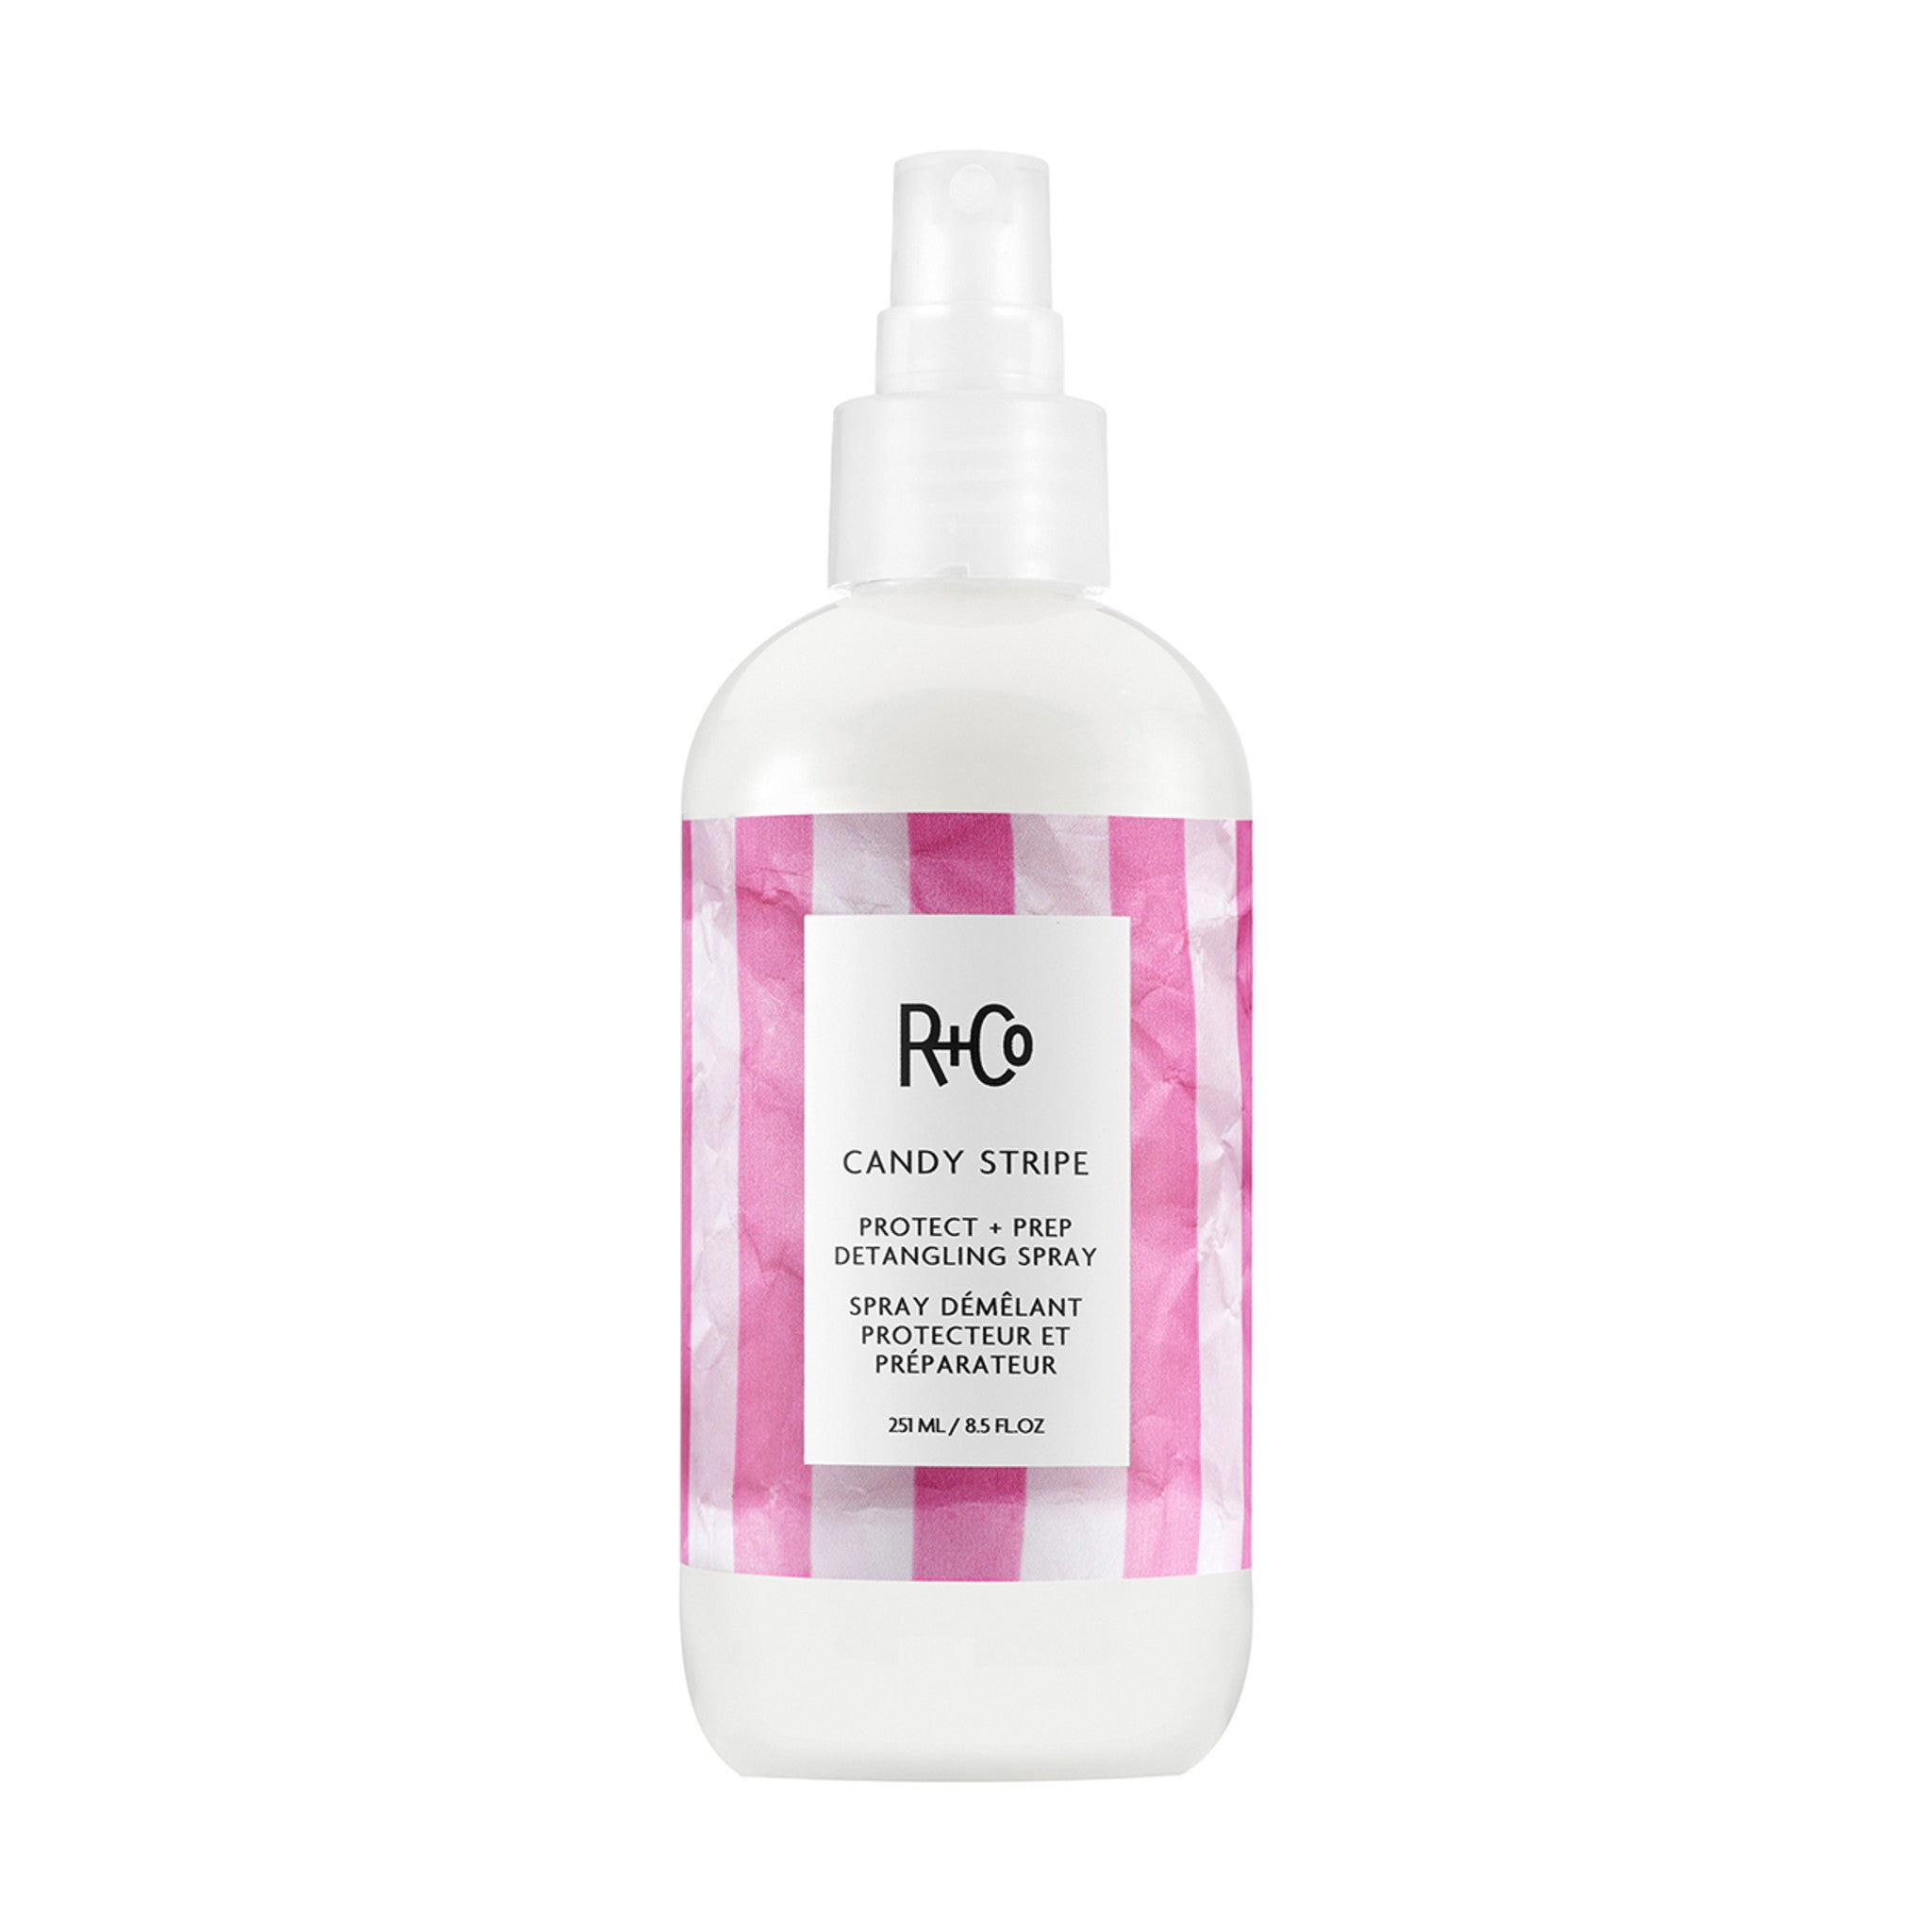 R+Co Candy Stripe Protect and Prep Detangling Spray main image.